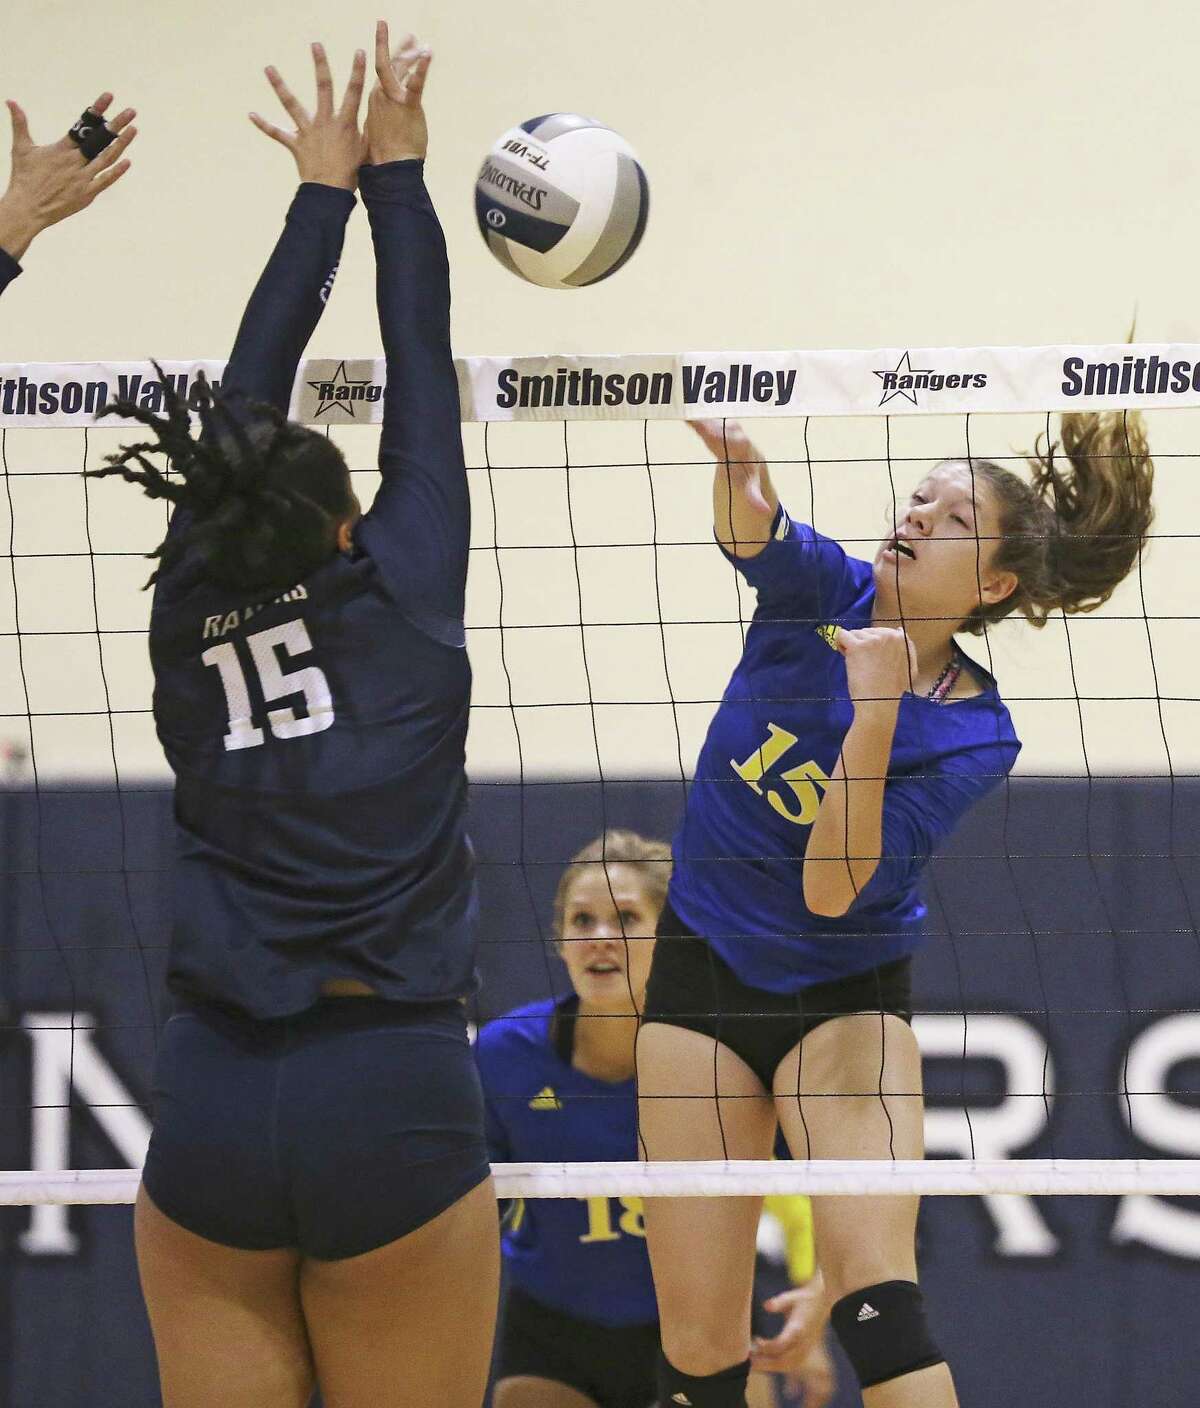 Shelby O'Neal gets a shot for Clemens to go past the Ranger's Tanyse Moehrig as Smithson Valley hosts Clemens in volleyball on September 19, 2017.